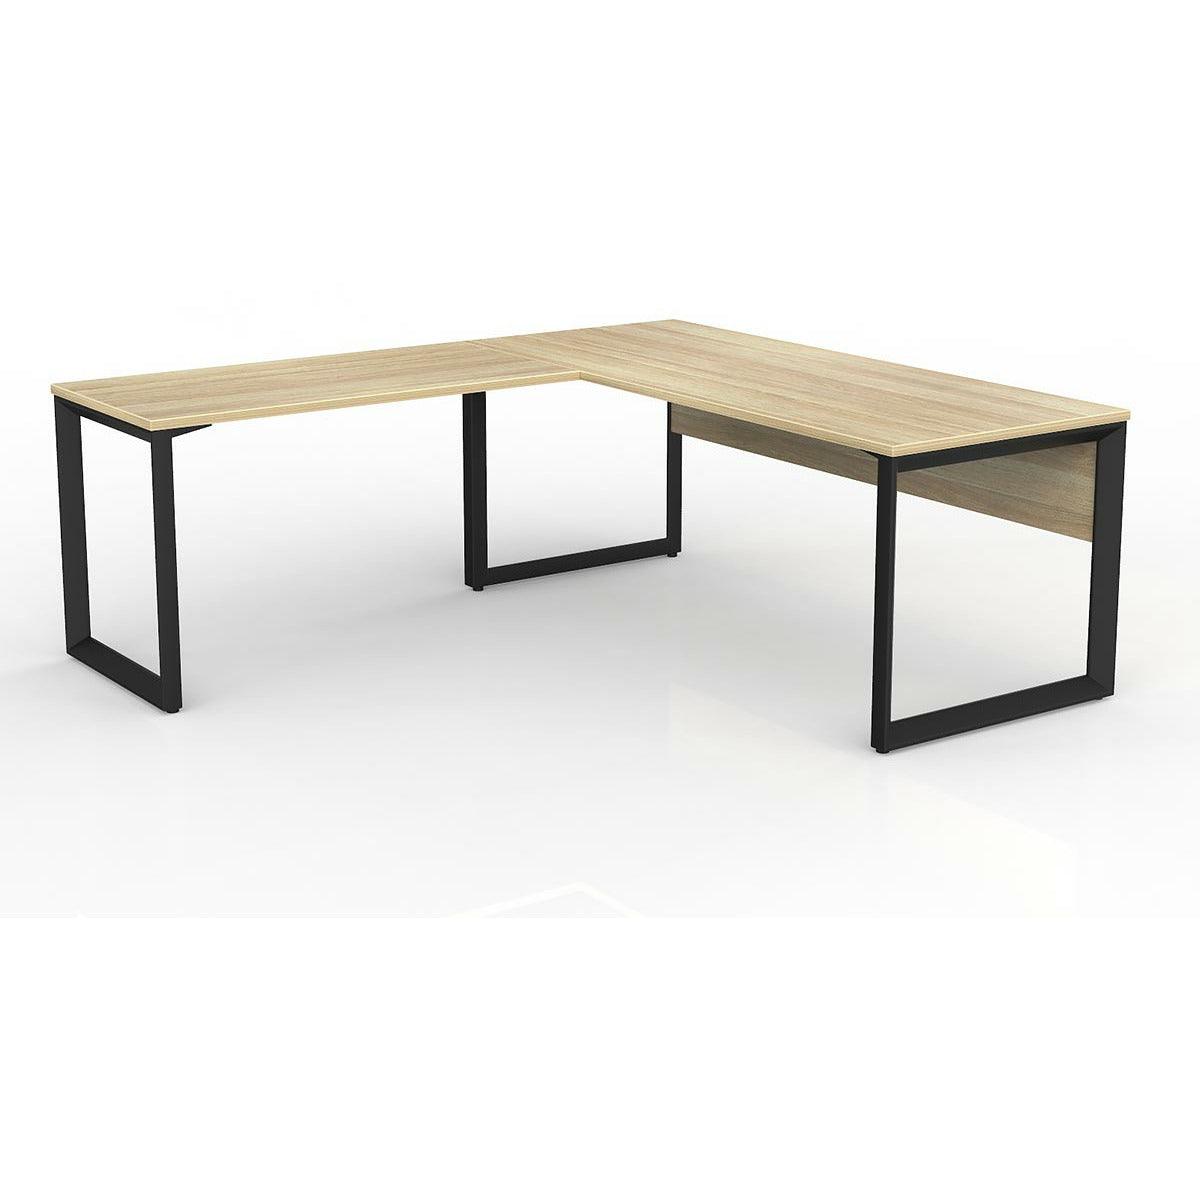 Anvil Desk with Return & Modesty - Office Furniture Company 